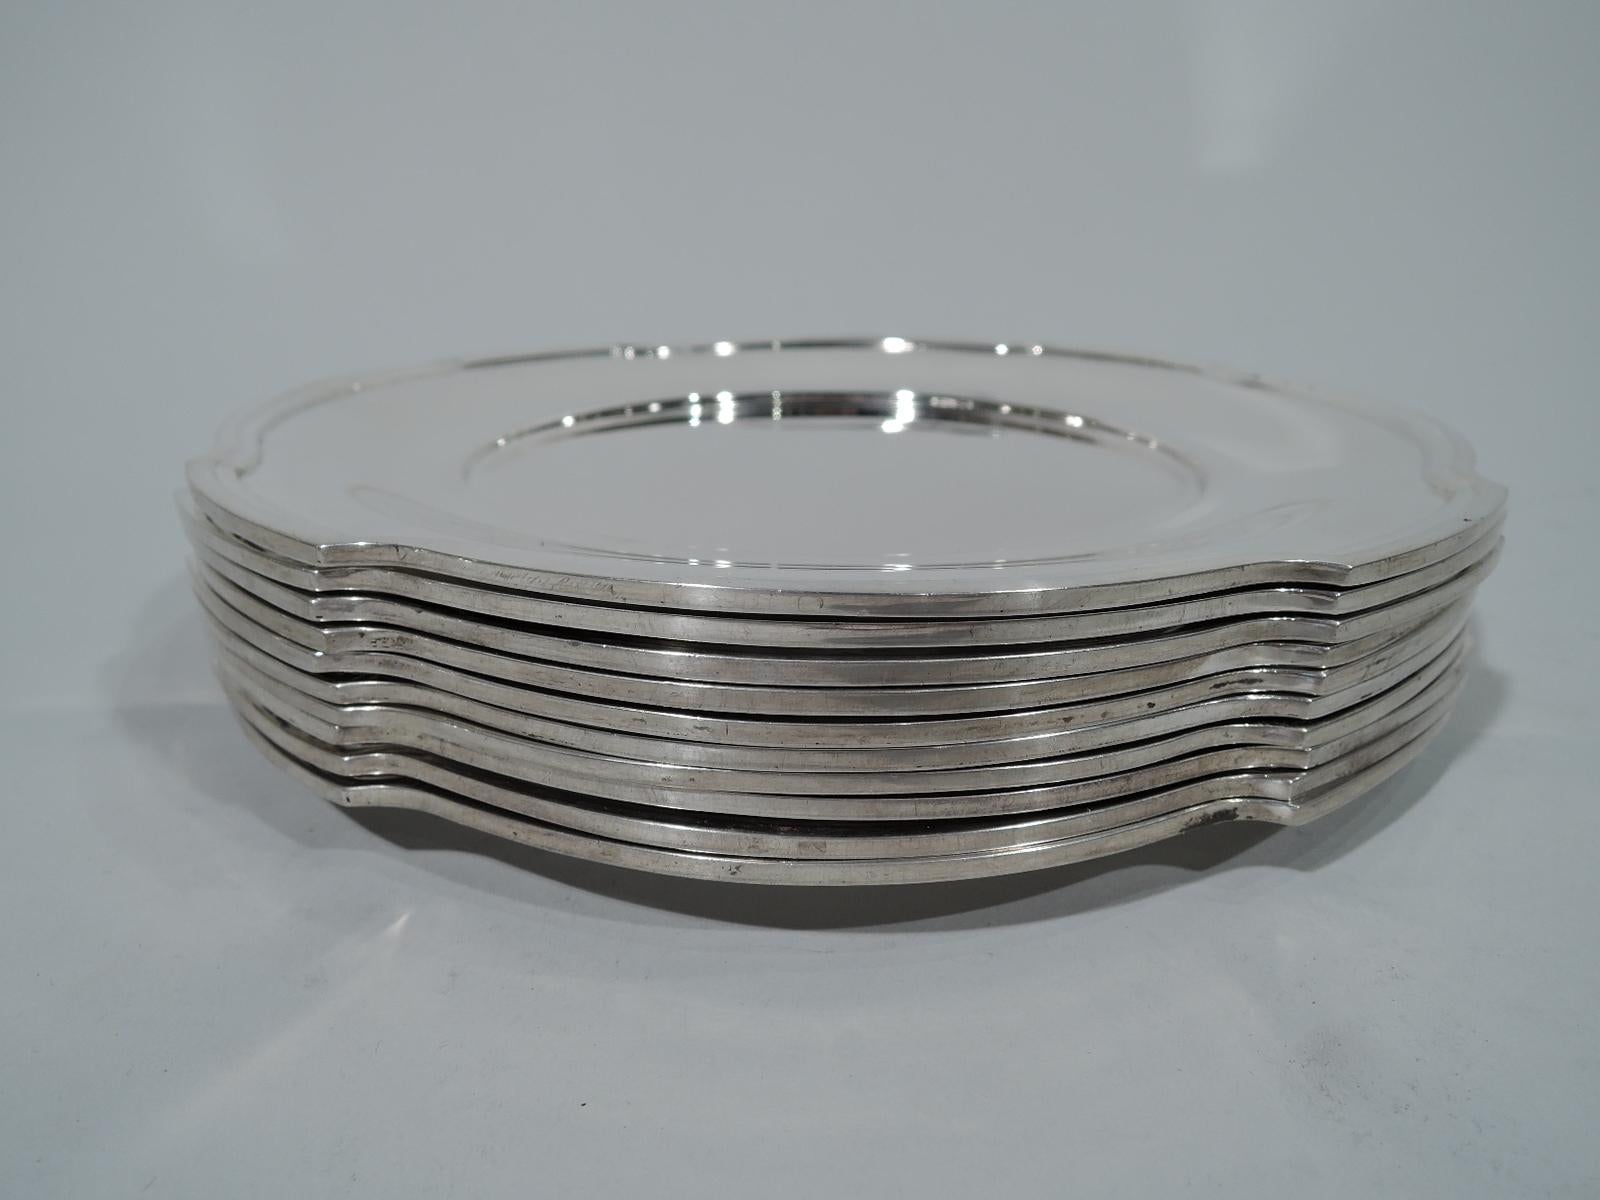 Ten Art Deco sterling silver appetizer plates. Made by R. Wallace & Sons in Wallingford, Conn. Each: Circular with well and shaped and molded rim. A smart set in unusual form. Hallmark includes no. 1850. French import mark. Total weight: 76.5 troy